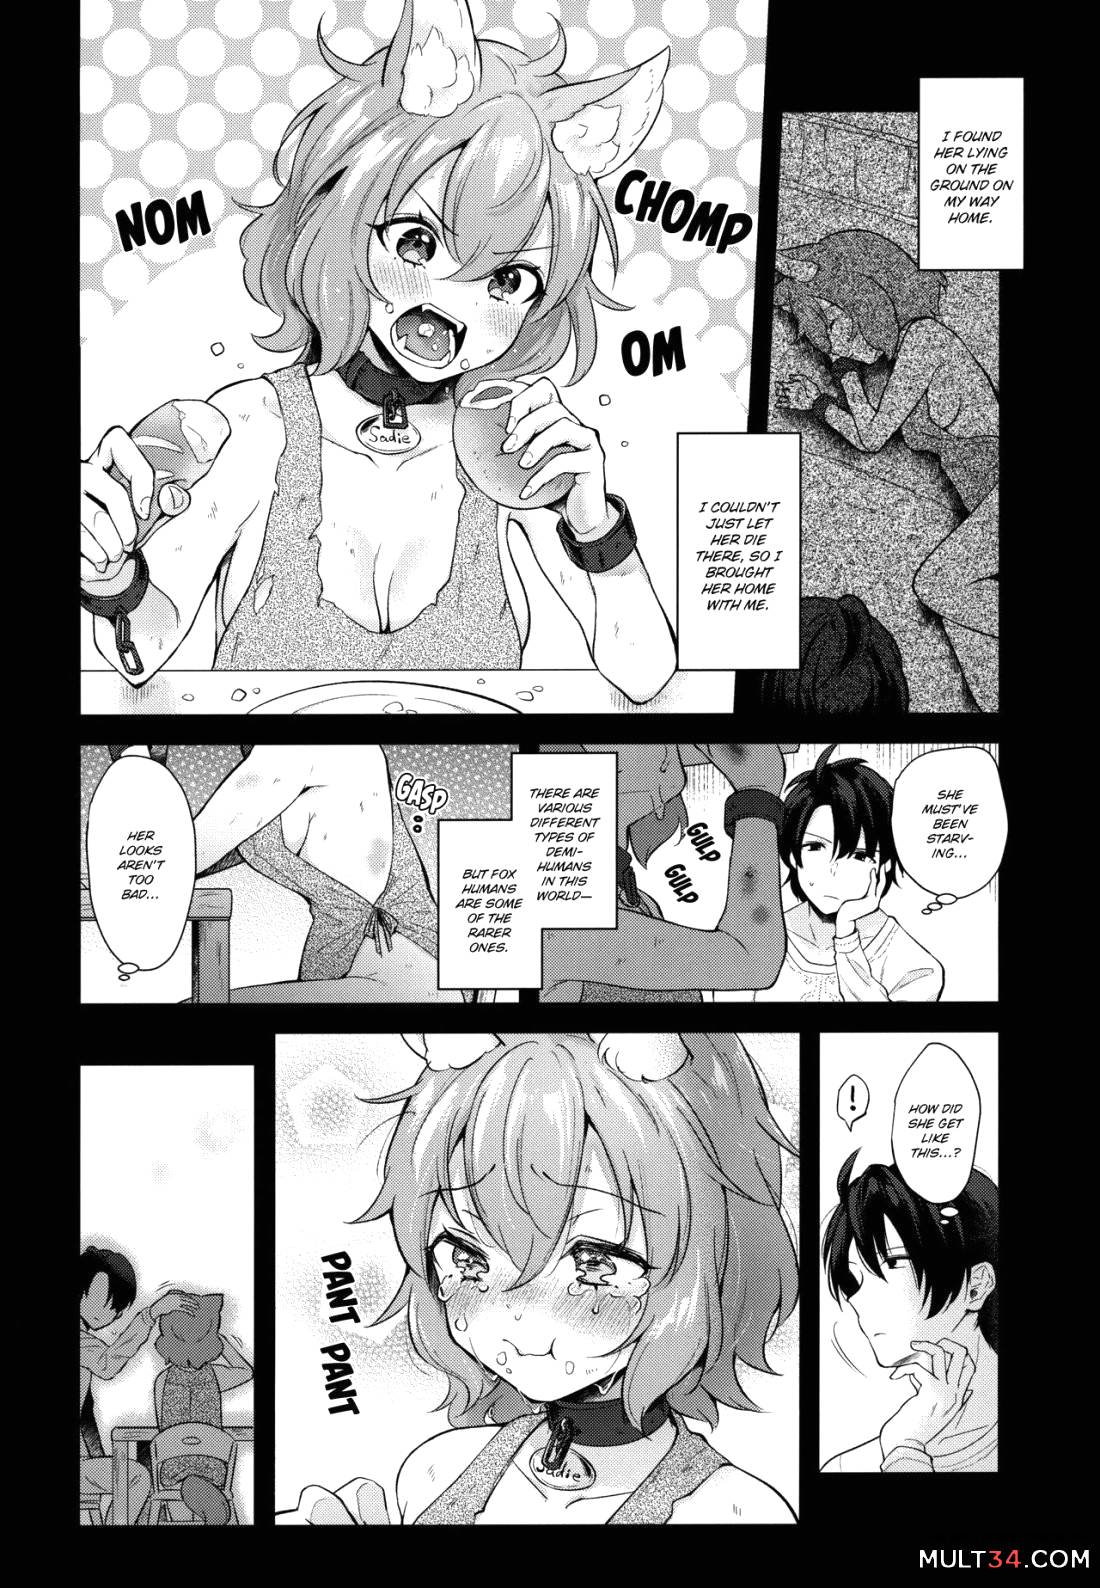 Kimi to Issho page 2